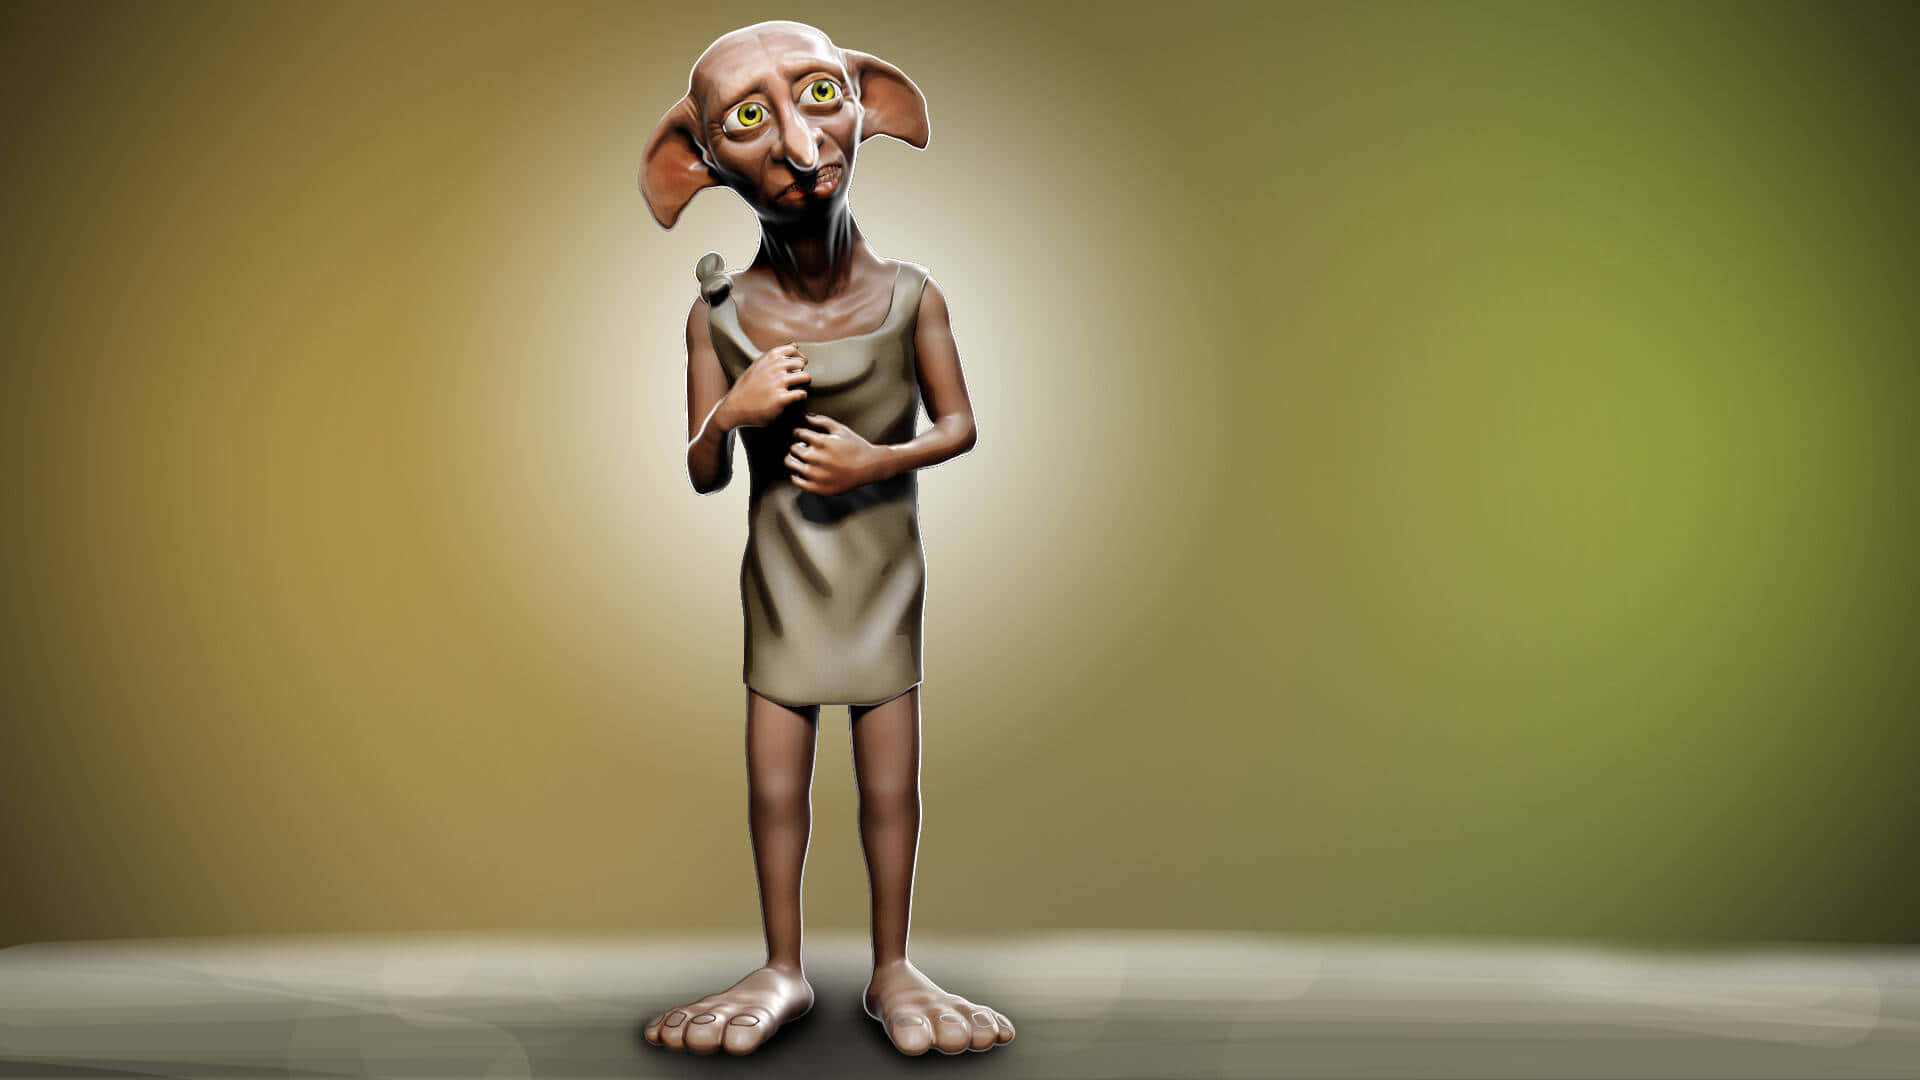 The ever loyal Dobby, the House Elf of Harry Potter fame. Wallpaper